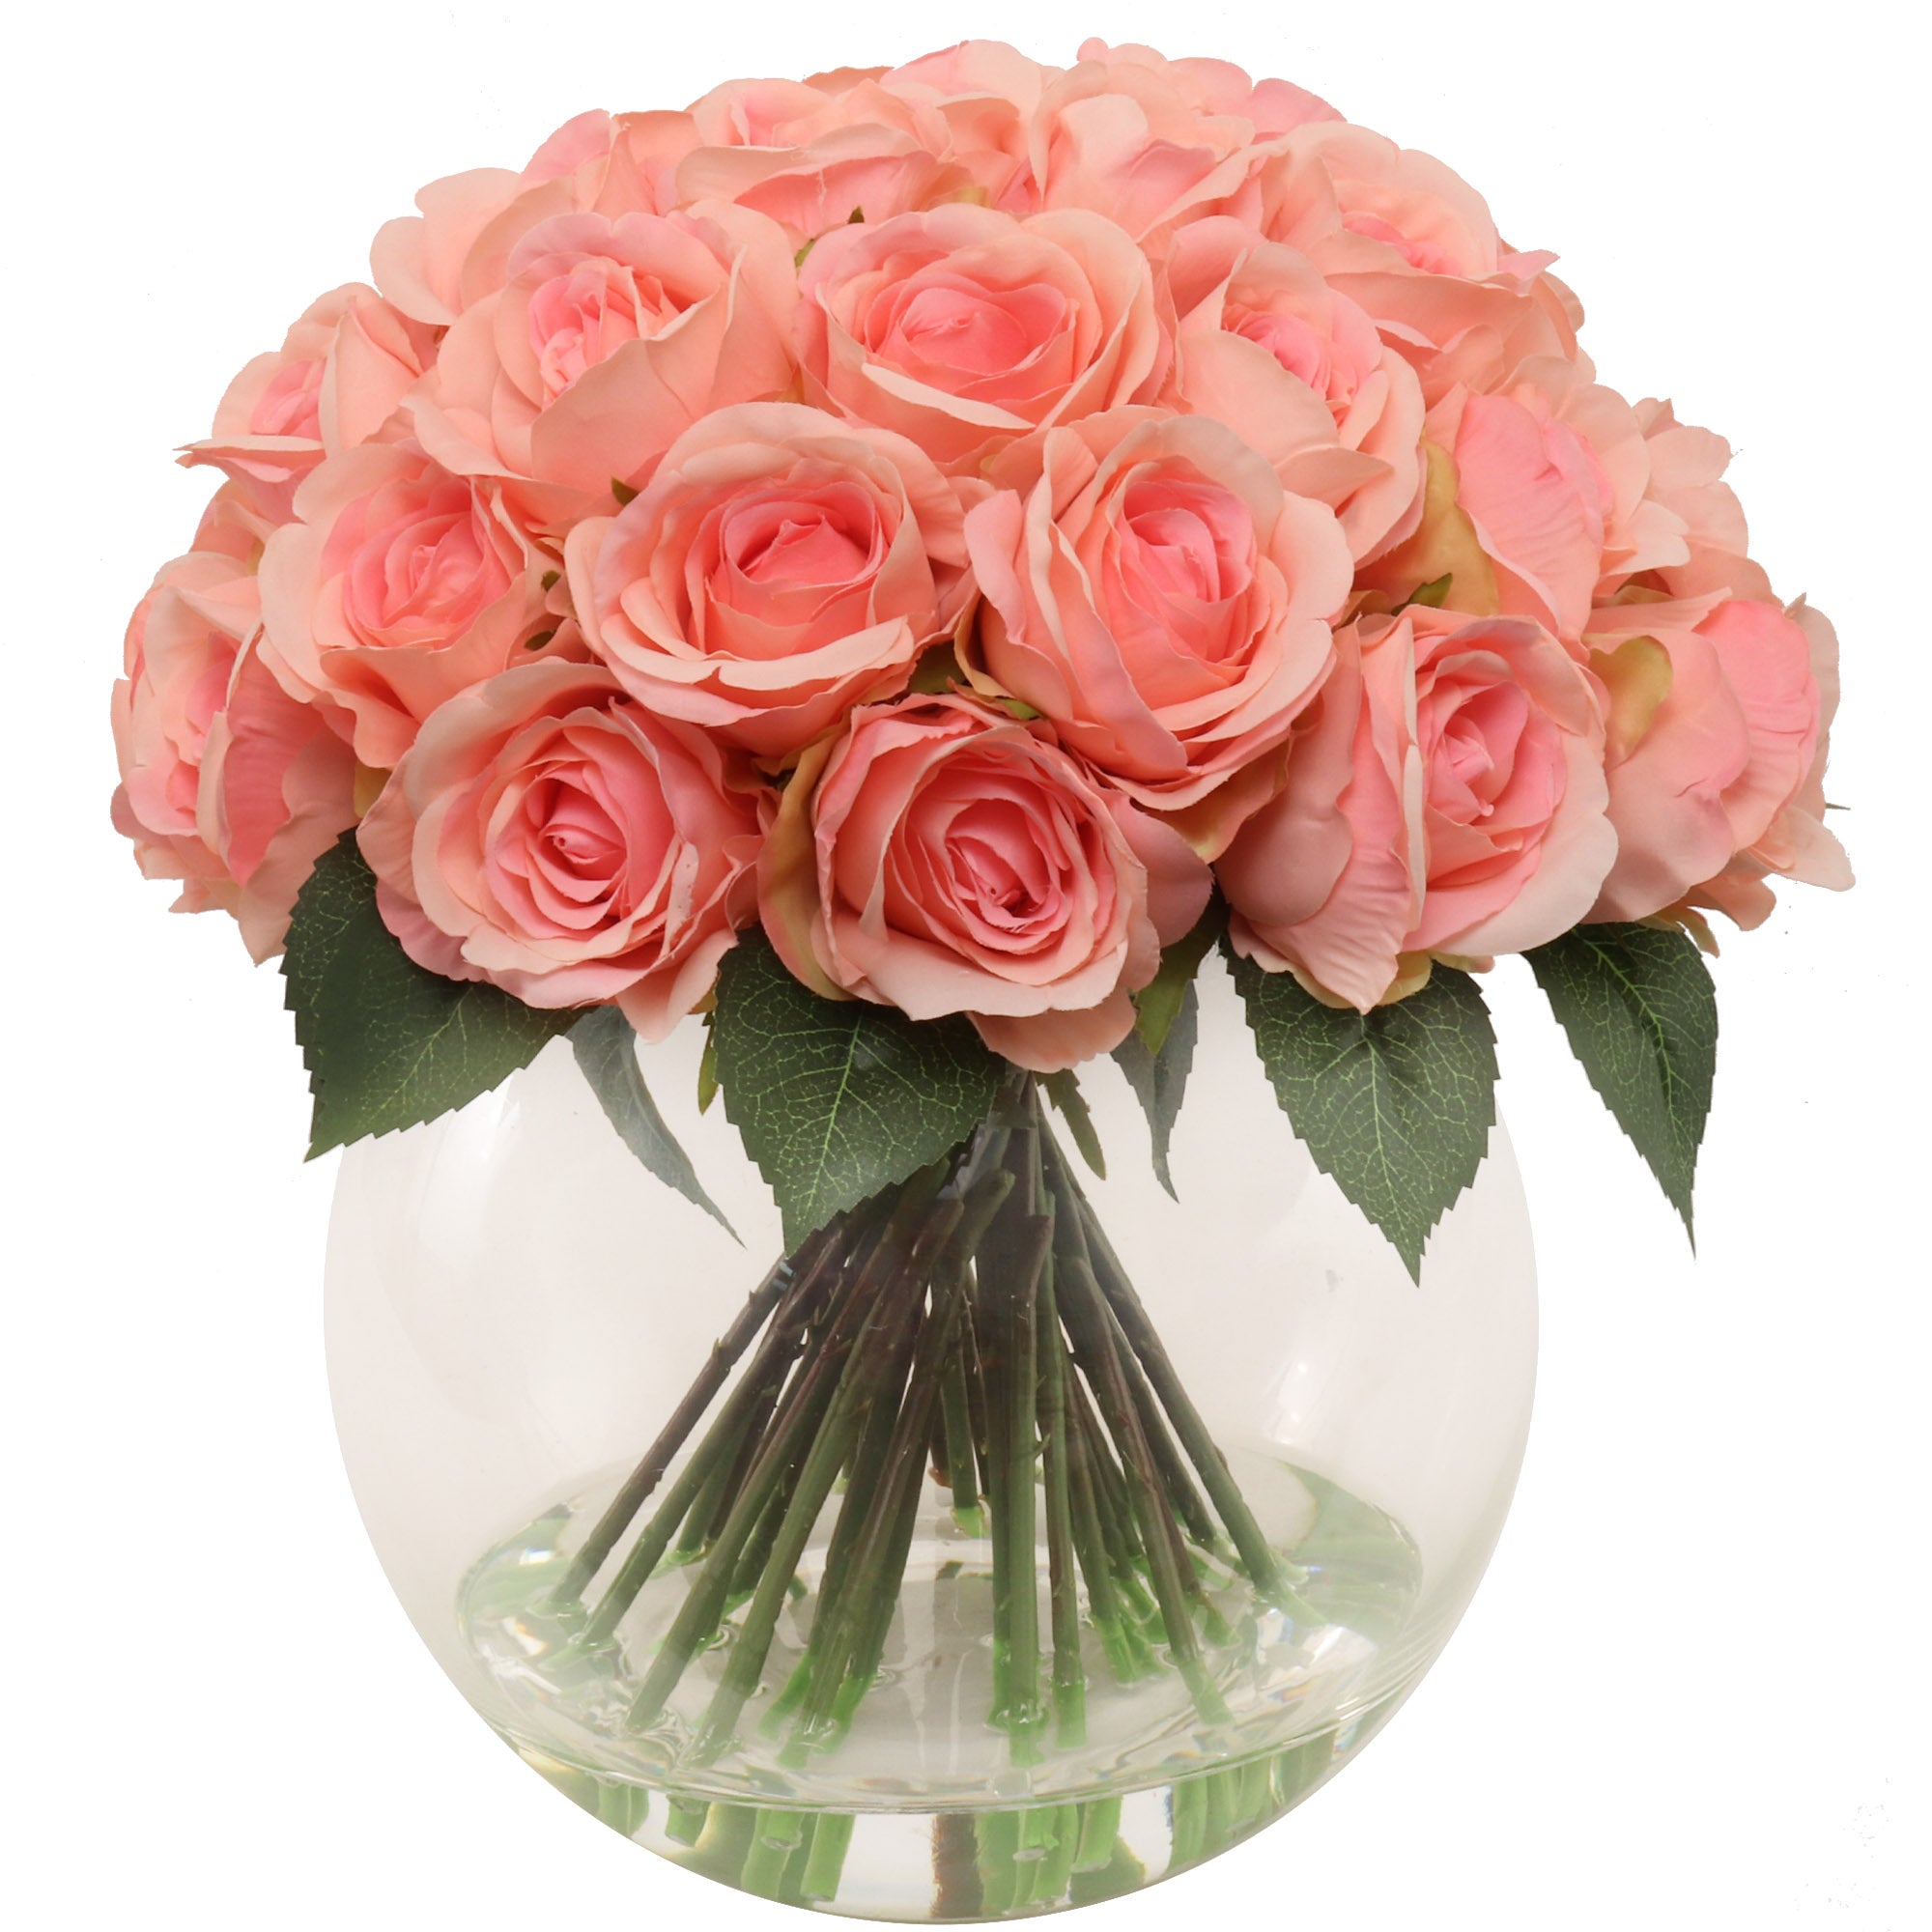 Elegant Creations 36-Head Artificial Pink Rose Arrangement in Glass Vase - Real Looking Fake Flowers for Home Decor, Wedding Centerpieces, Romantic Gifts, and Table Enhancements